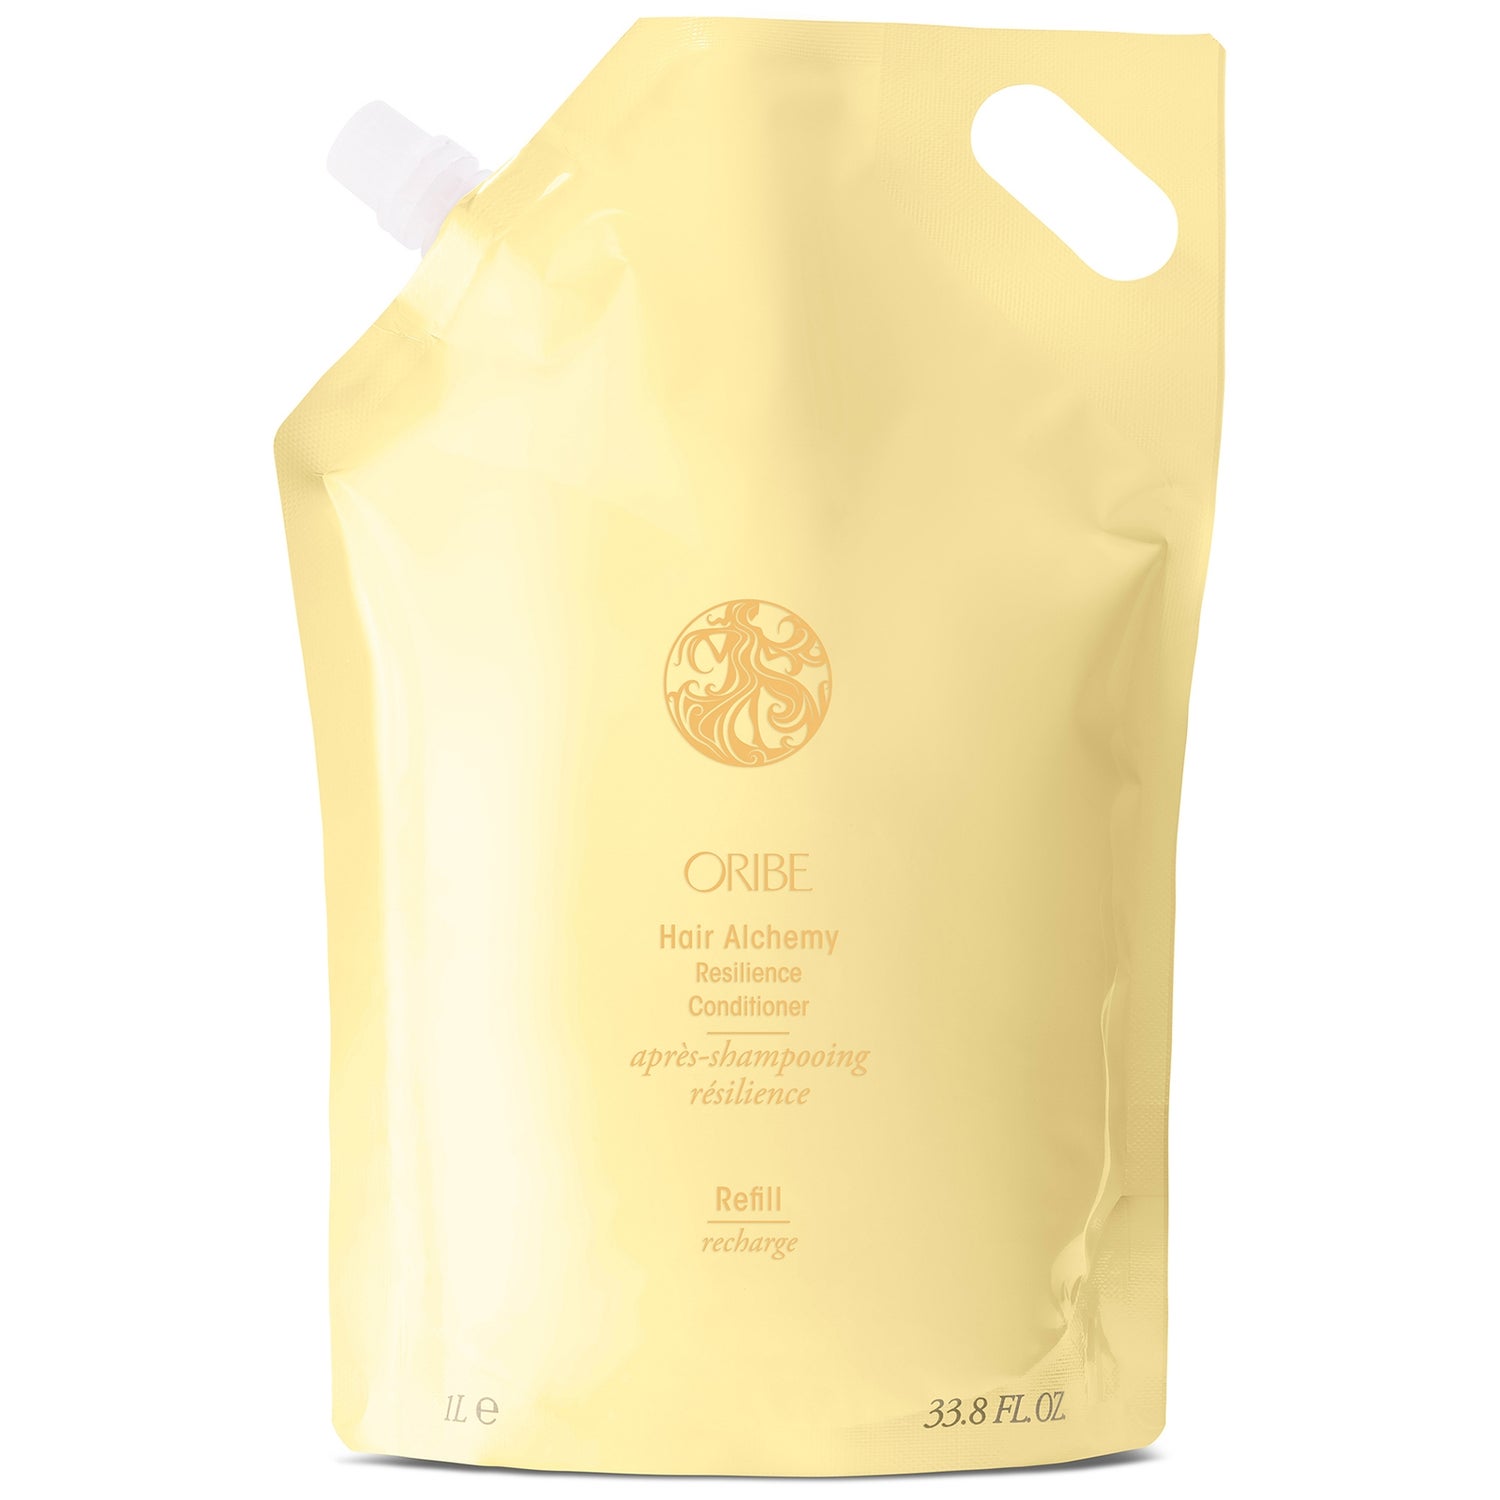 Oribe Hair Alchemy Resilience Conditioner 33.8 oz